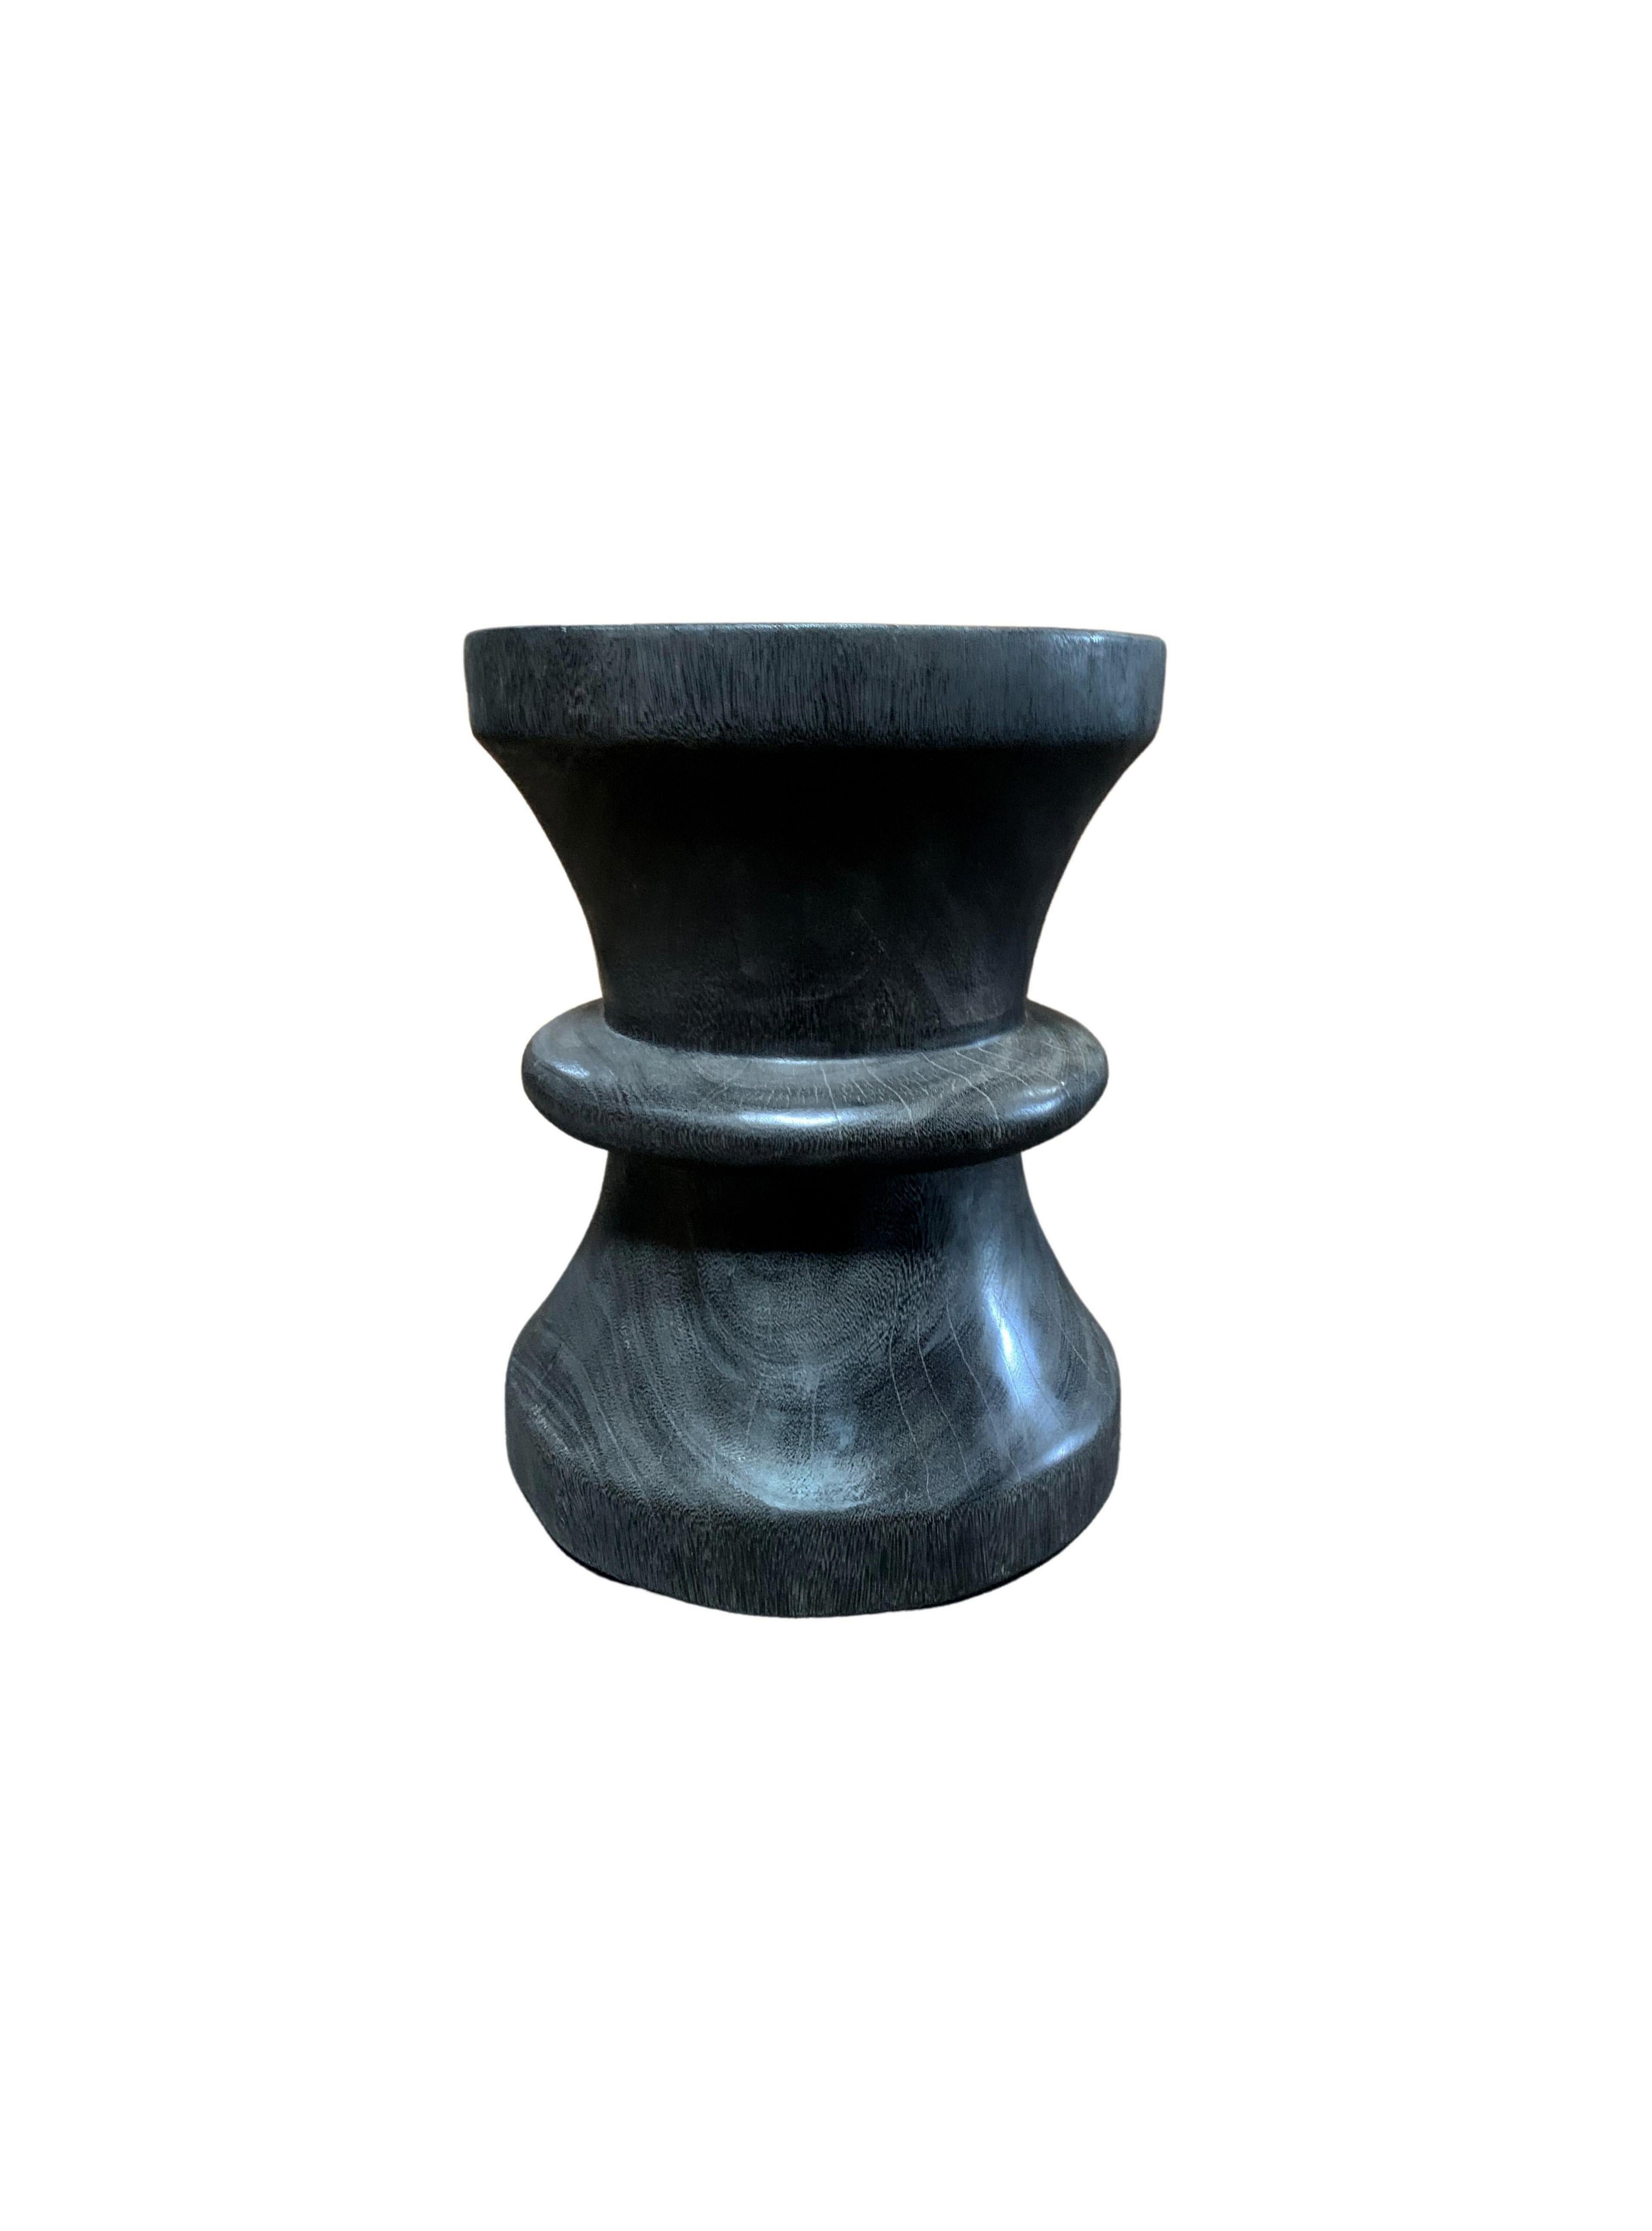 Organic Modern Sculptural Side Table Crafted from Mango Wood & Burnt Finish For Sale